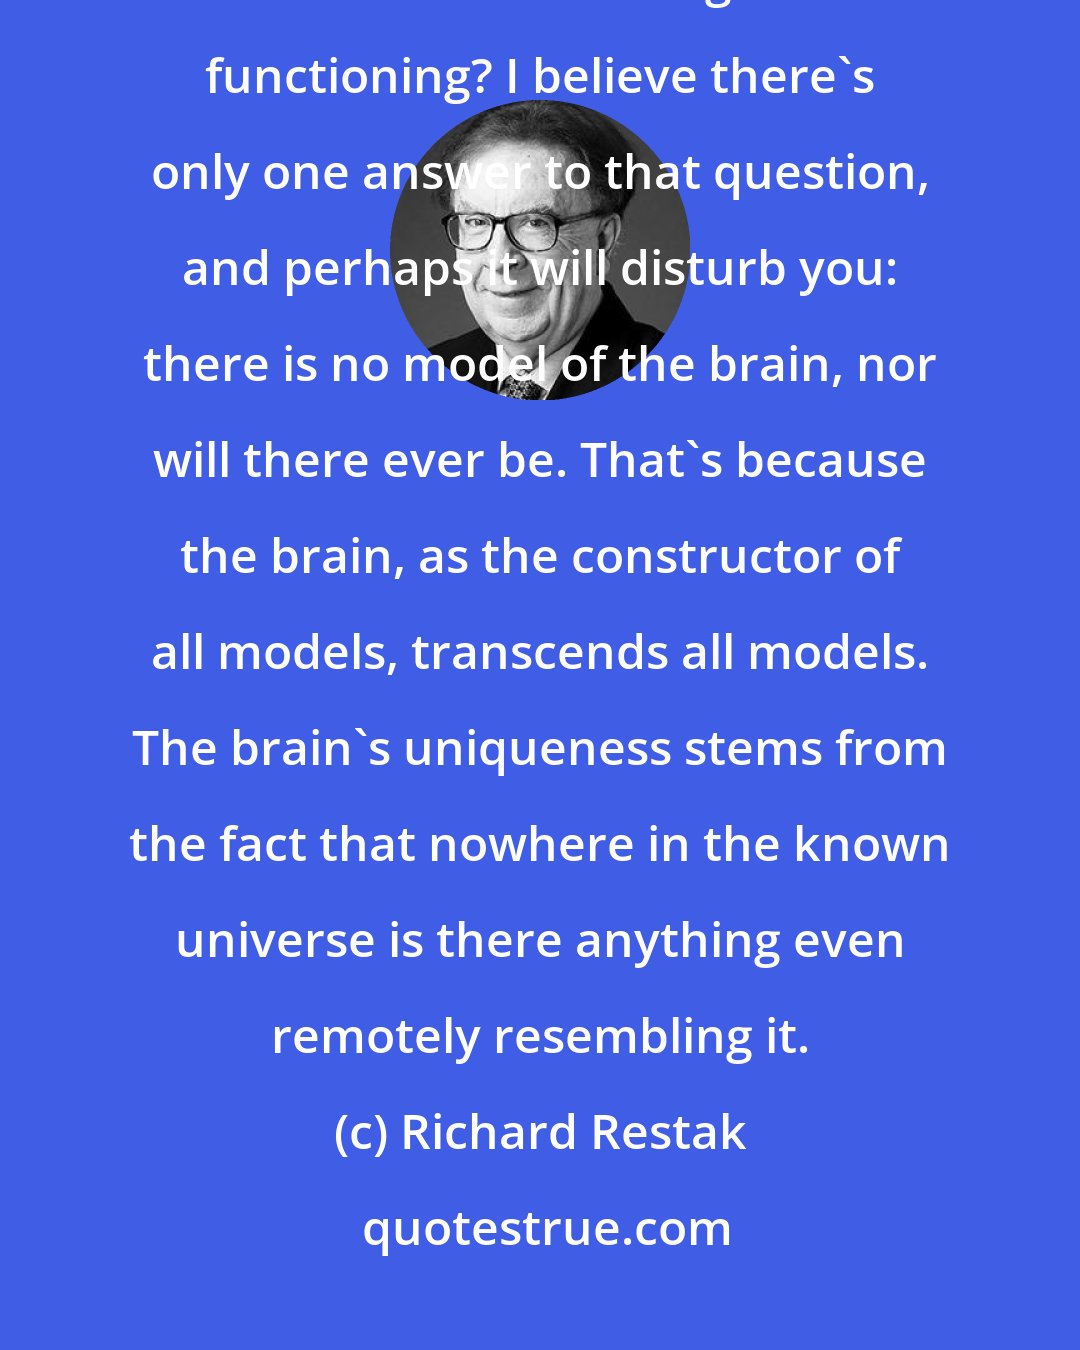 Richard Restak: But if the brain is not like a computer, then what is it like? What kind of model can we form in regard to its functioning? I believe there's only one answer to that question, and perhaps it will disturb you: there is no model of the brain, nor will there ever be. That's because the brain, as the constructor of all models, transcends all models. The brain's uniqueness stems from the fact that nowhere in the known universe is there anything even remotely resembling it.